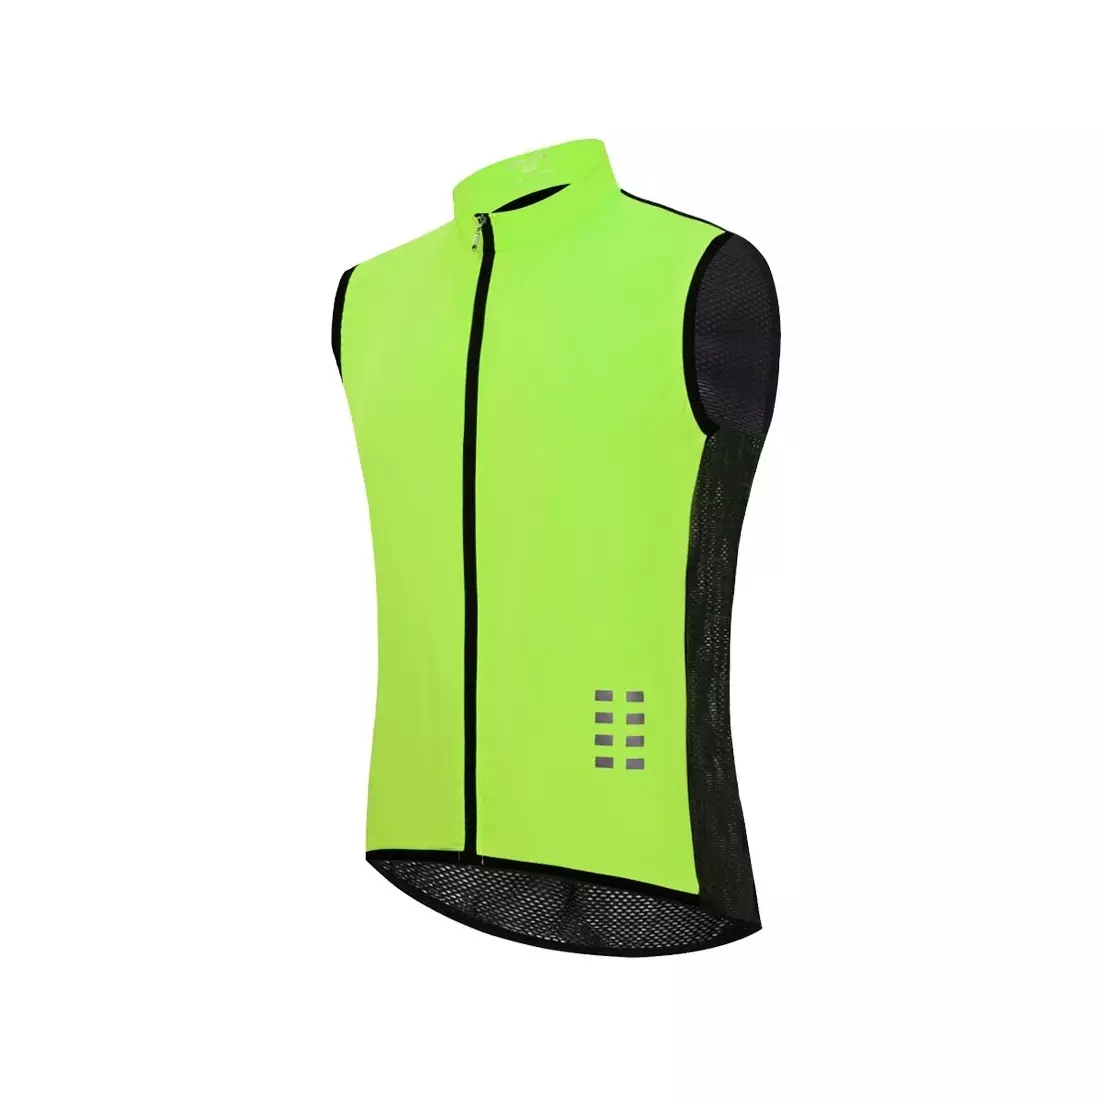 WOSAWE BL221-G men's windproof cycling vest with mesh back, fluor yellow